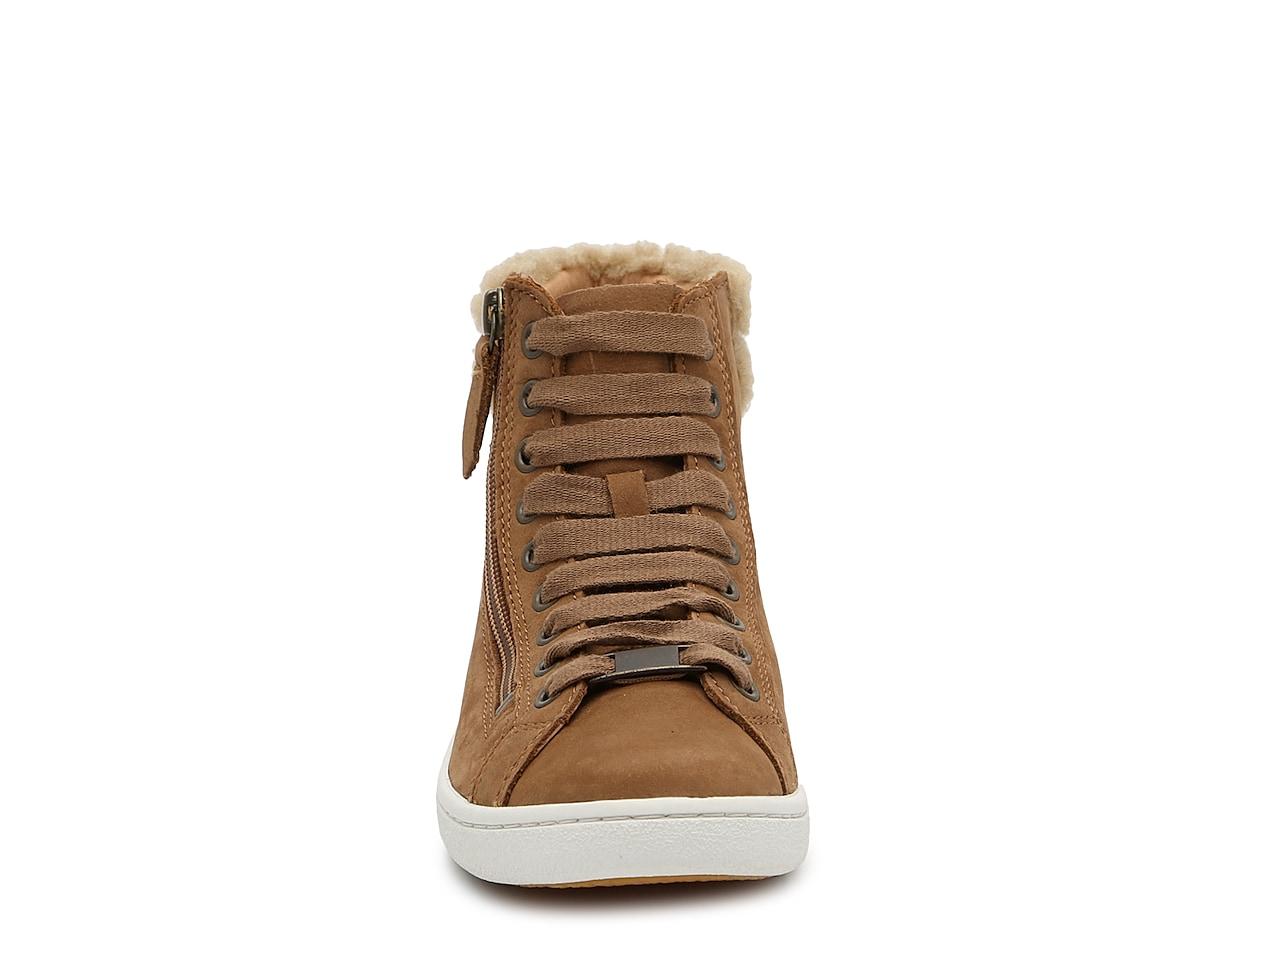 Ugg Womens High Top Sneakers | vlr.eng.br